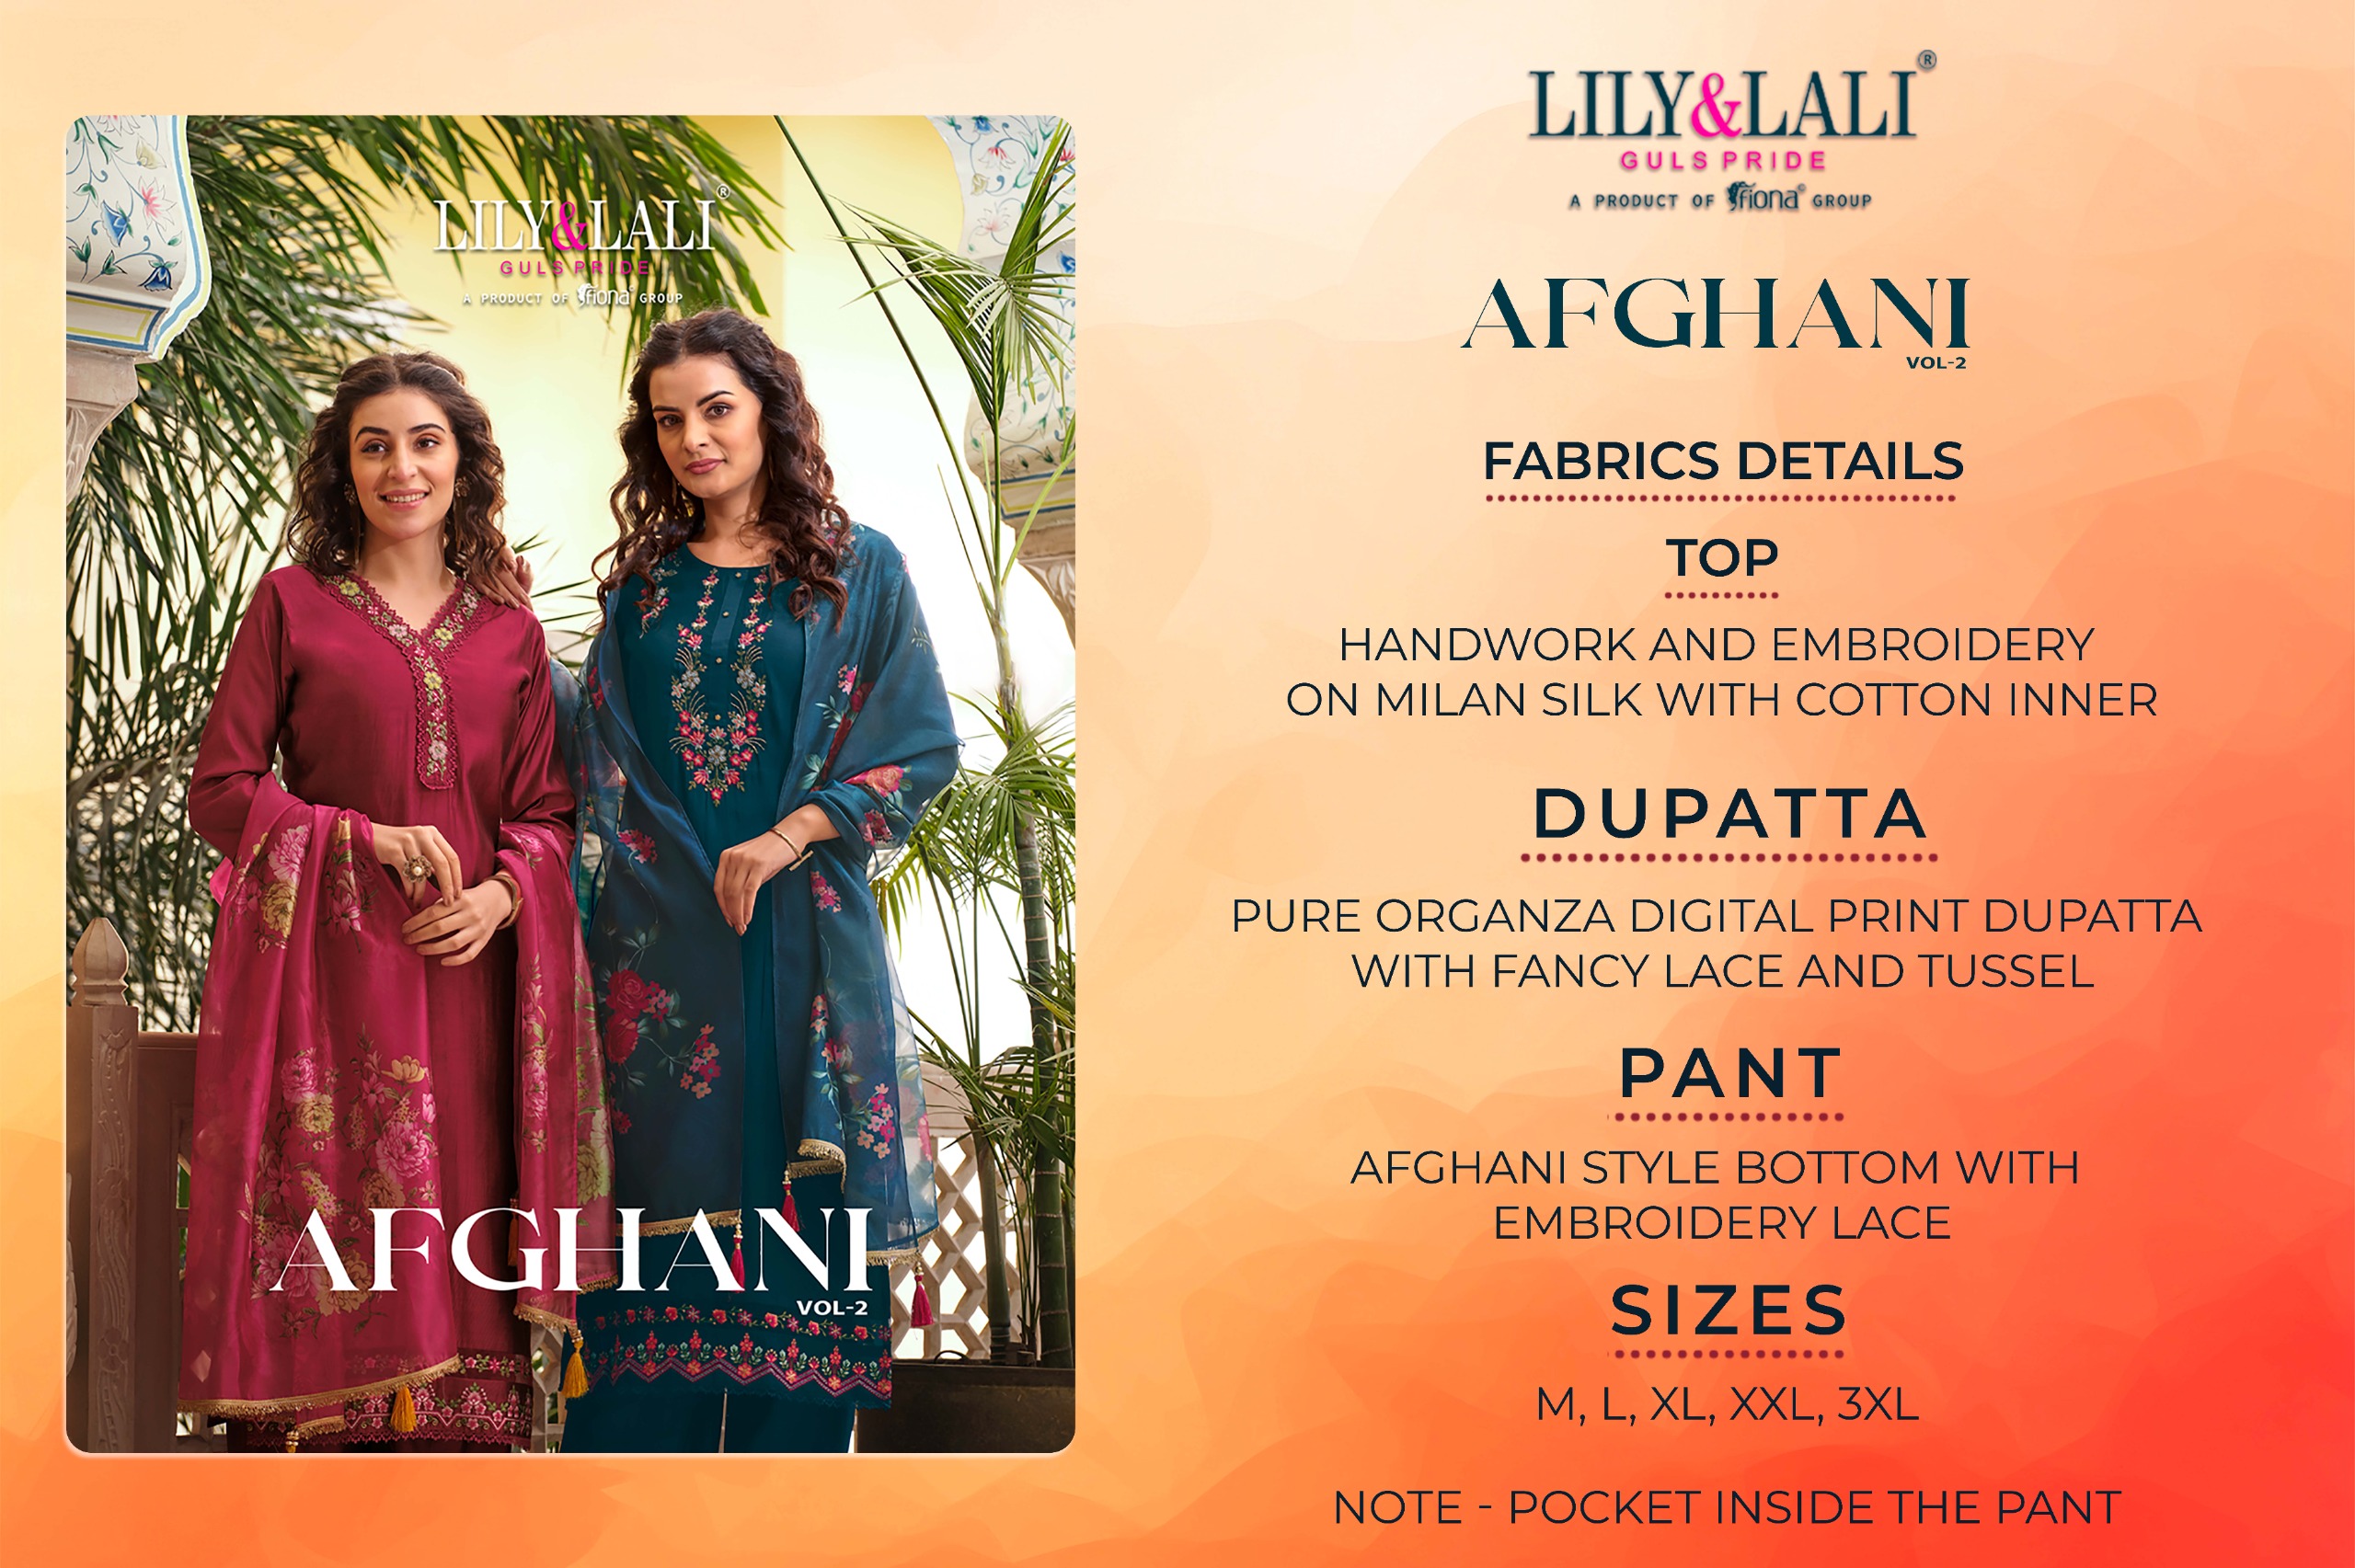 Lily And Lali Afghani Vol 2 collection 9